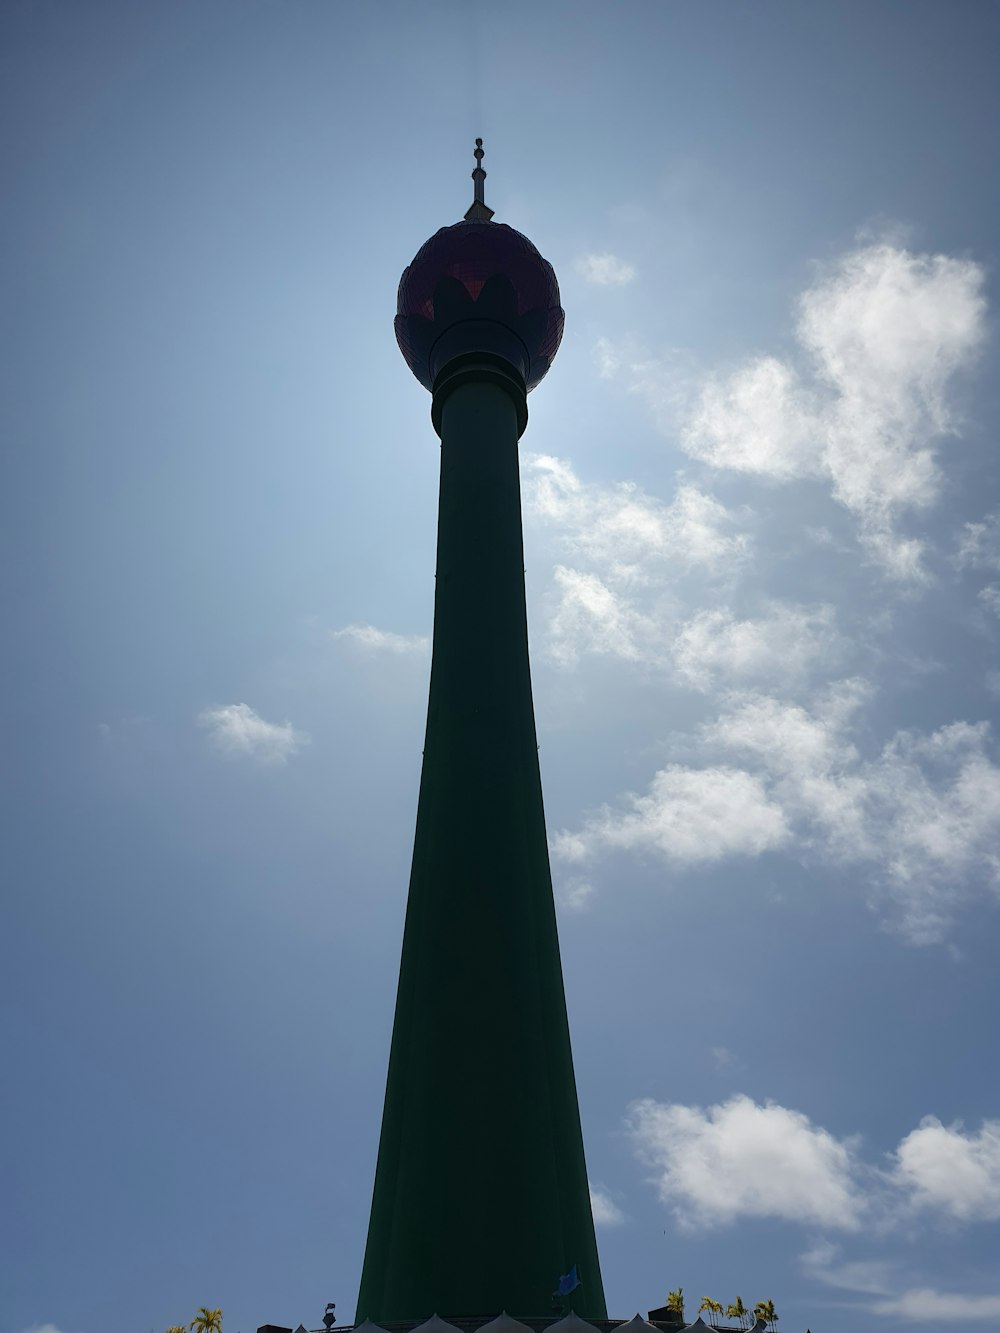 a tall green tower with a clock on top